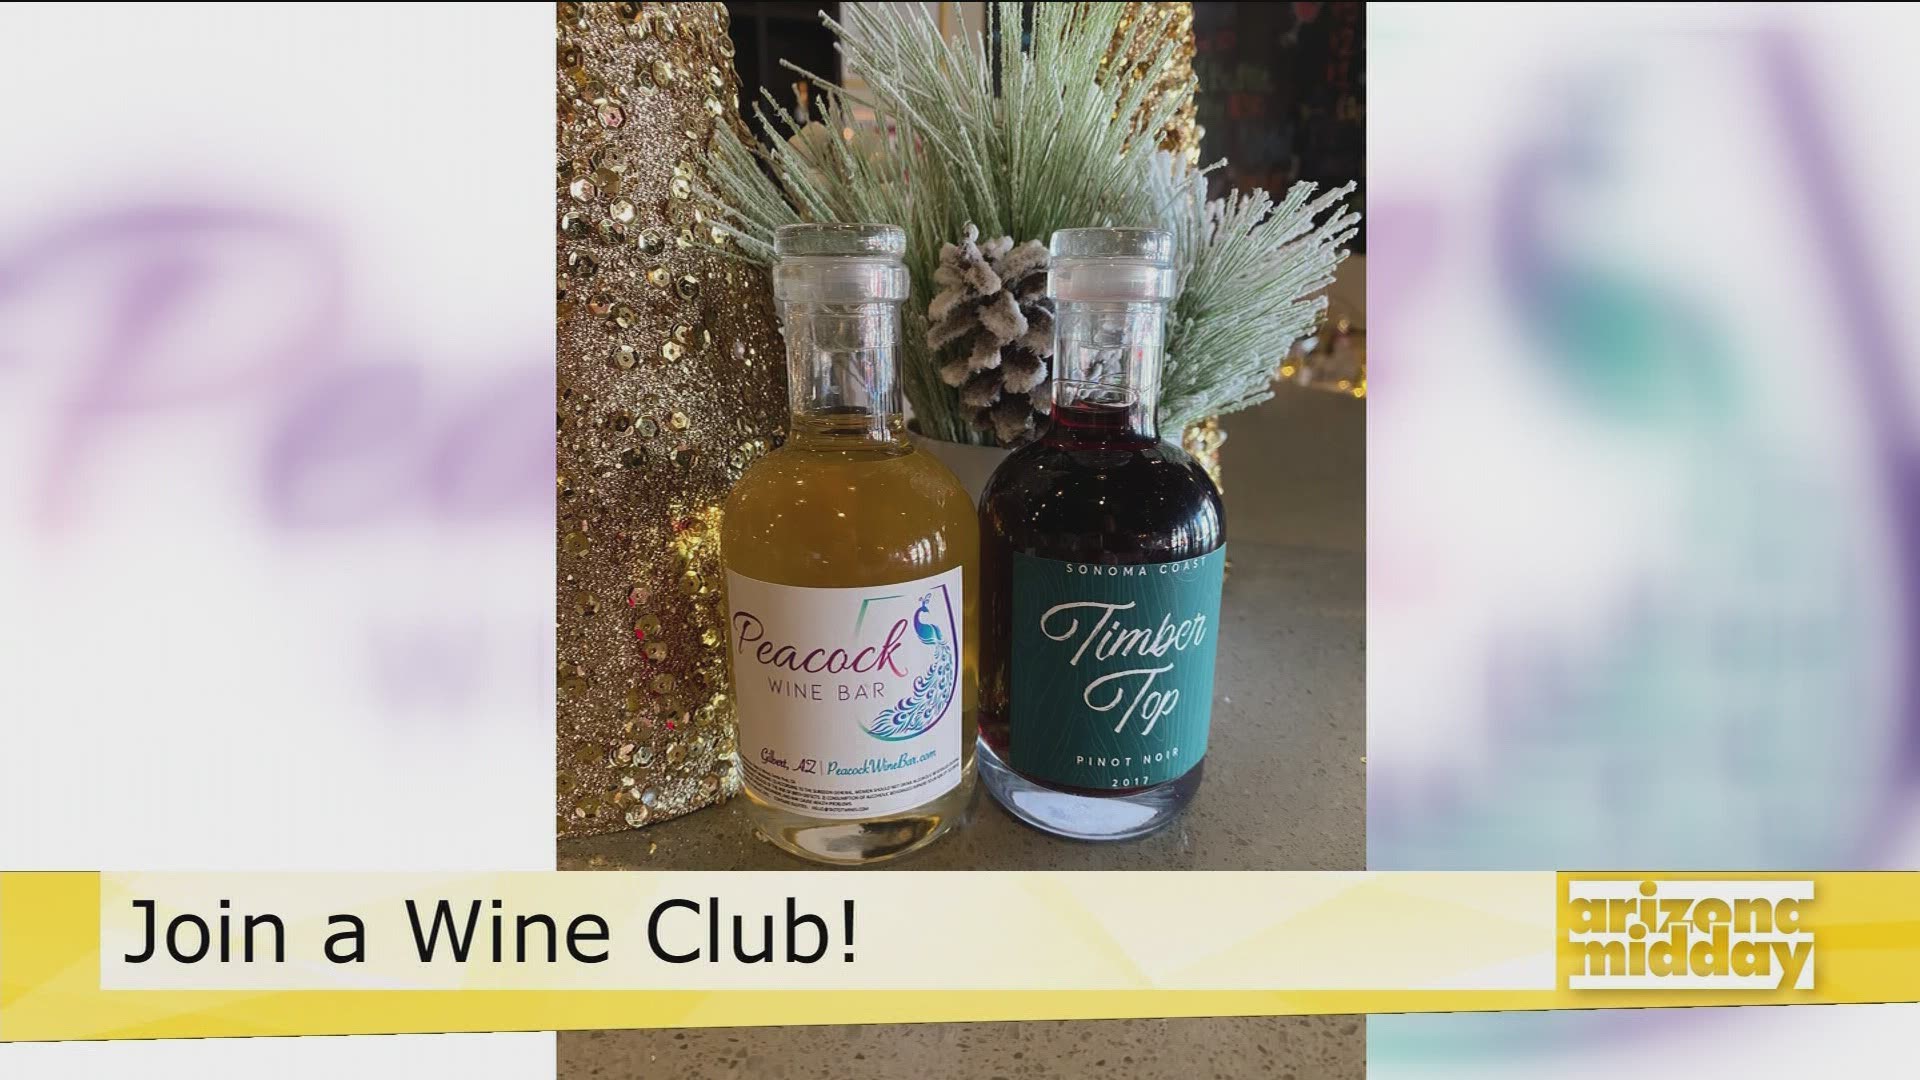 Tracy Wallace tells us all about what you can expect if you join the local wine club at Peacock Wine Bar.